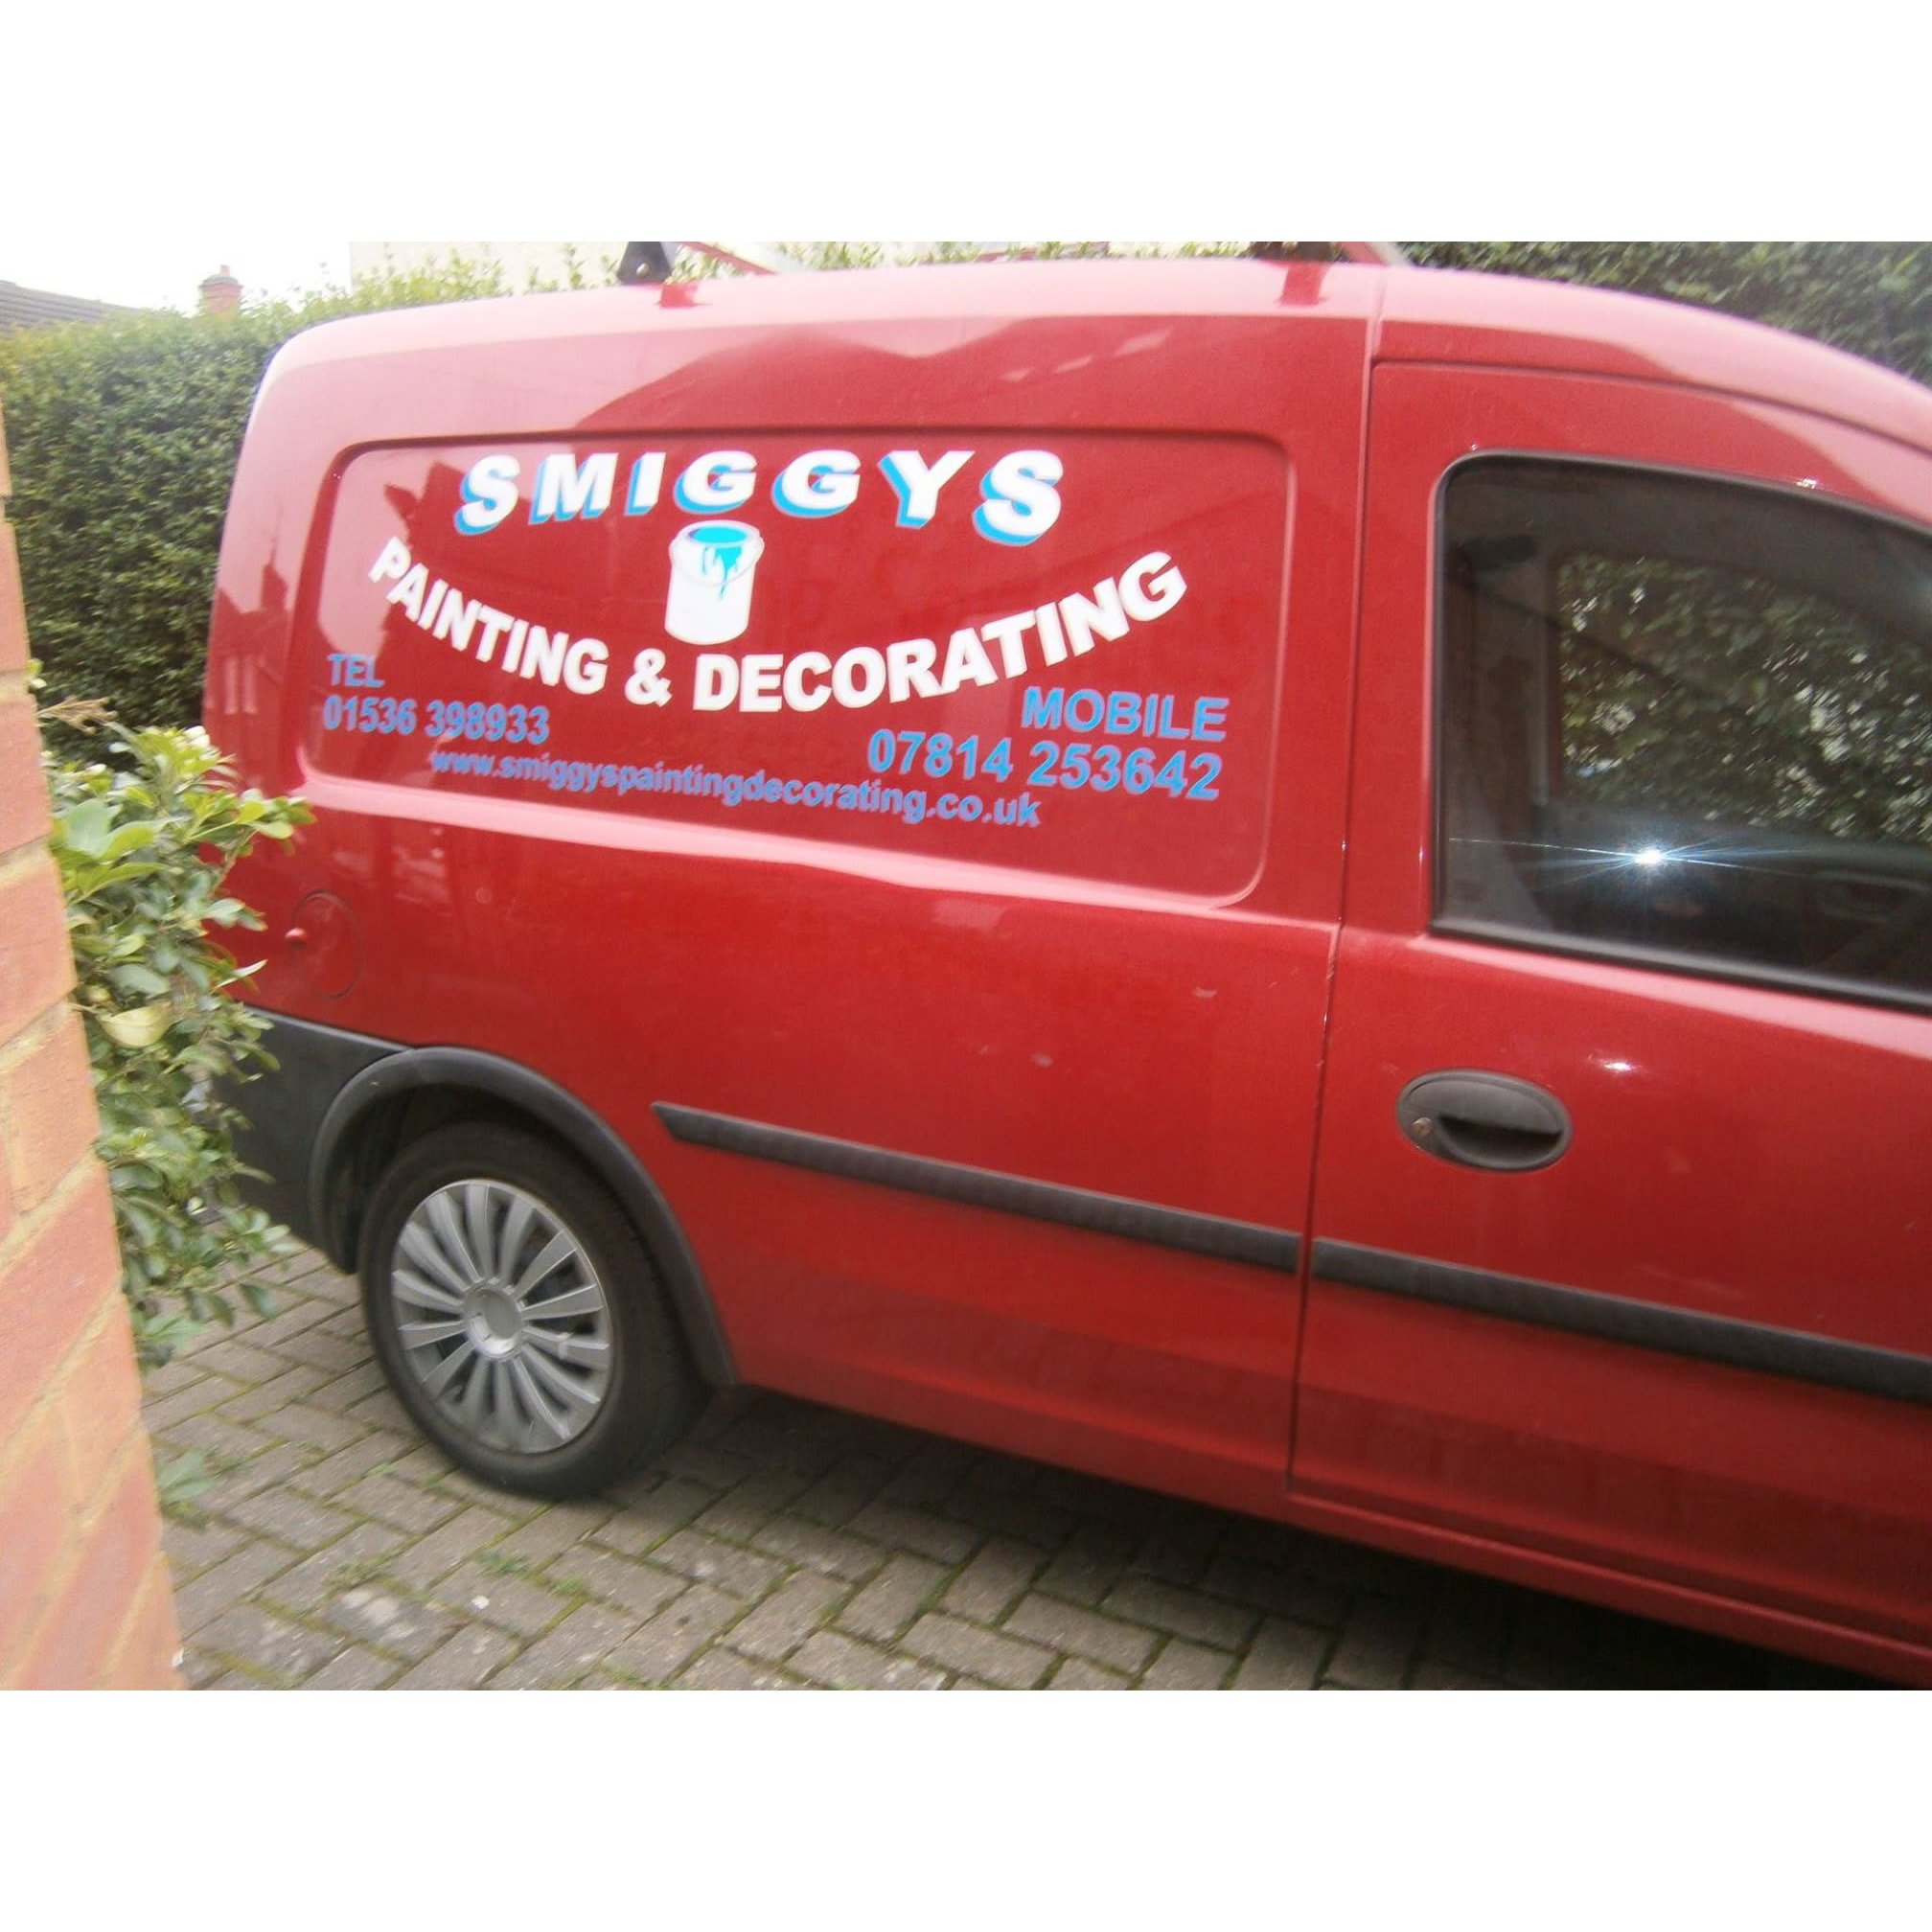 Smiggy's Painting & Decorating - Kettering, Northamptonshire NN15 5PG - 07814 253642 | ShowMeLocal.com